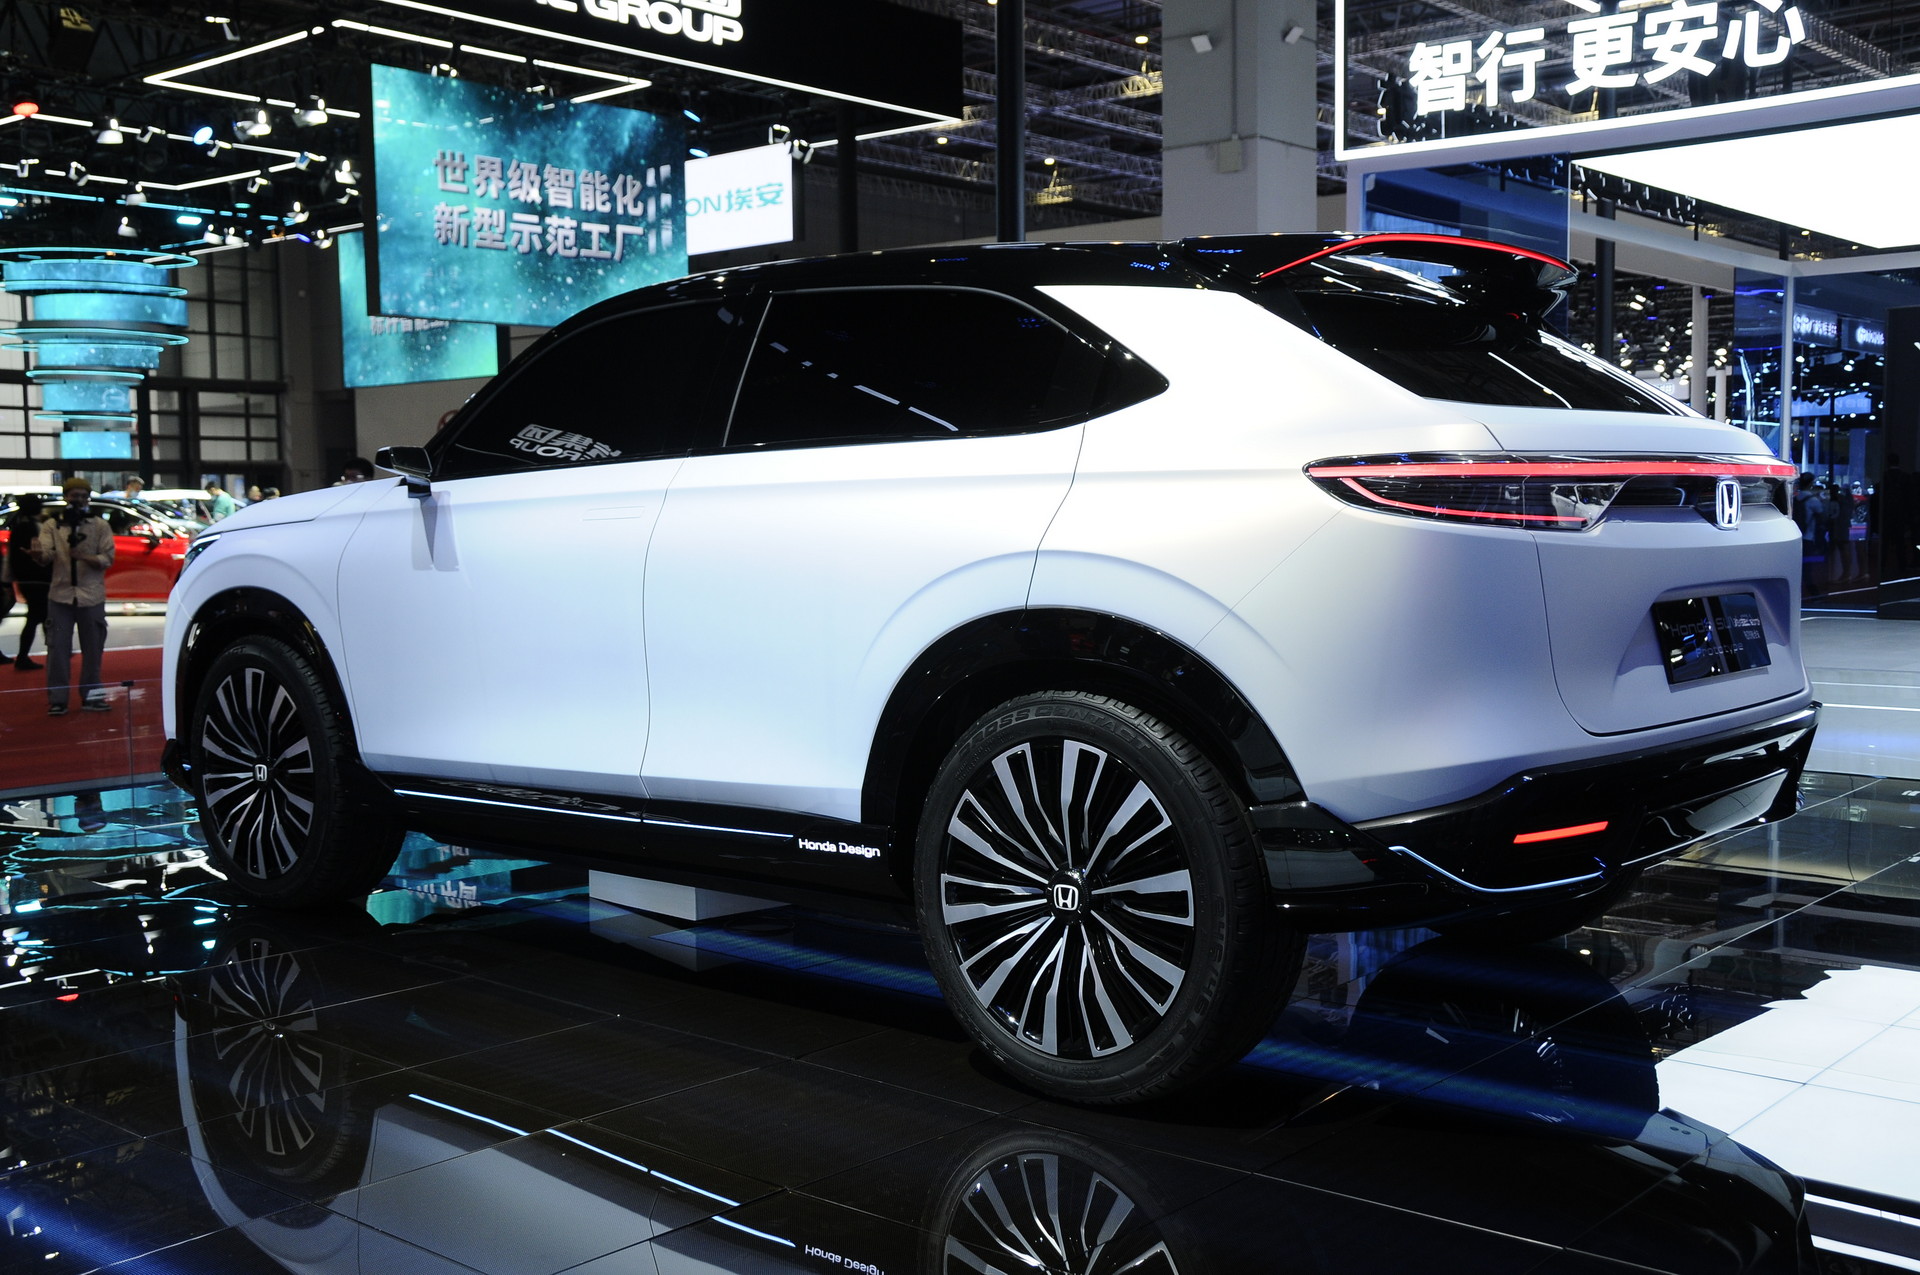 Honda Unveils New Electric SUV e: Prototype, Previewing What Could Be